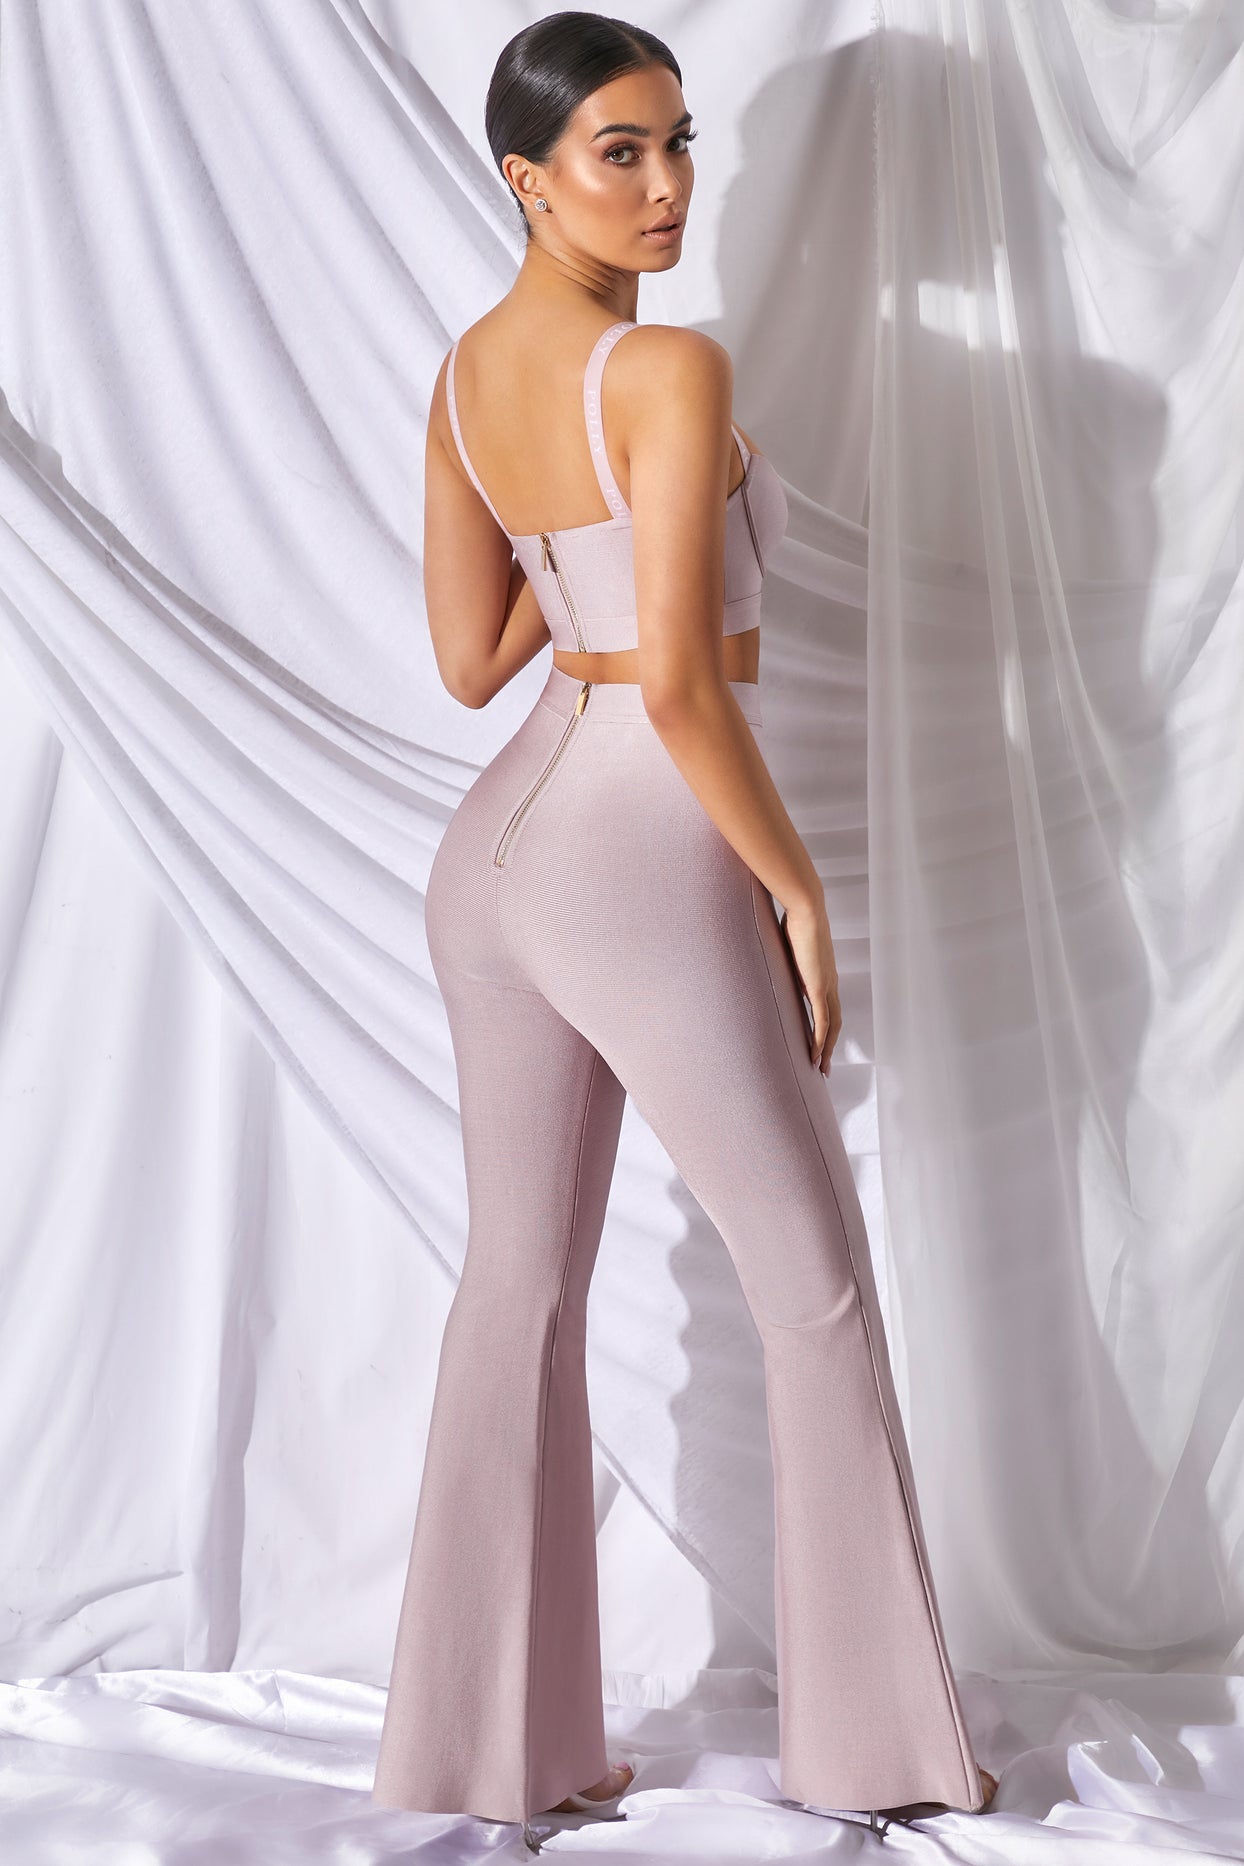 Too Good For You Petite High Waisted Bandage Flare Trousers in Mauve